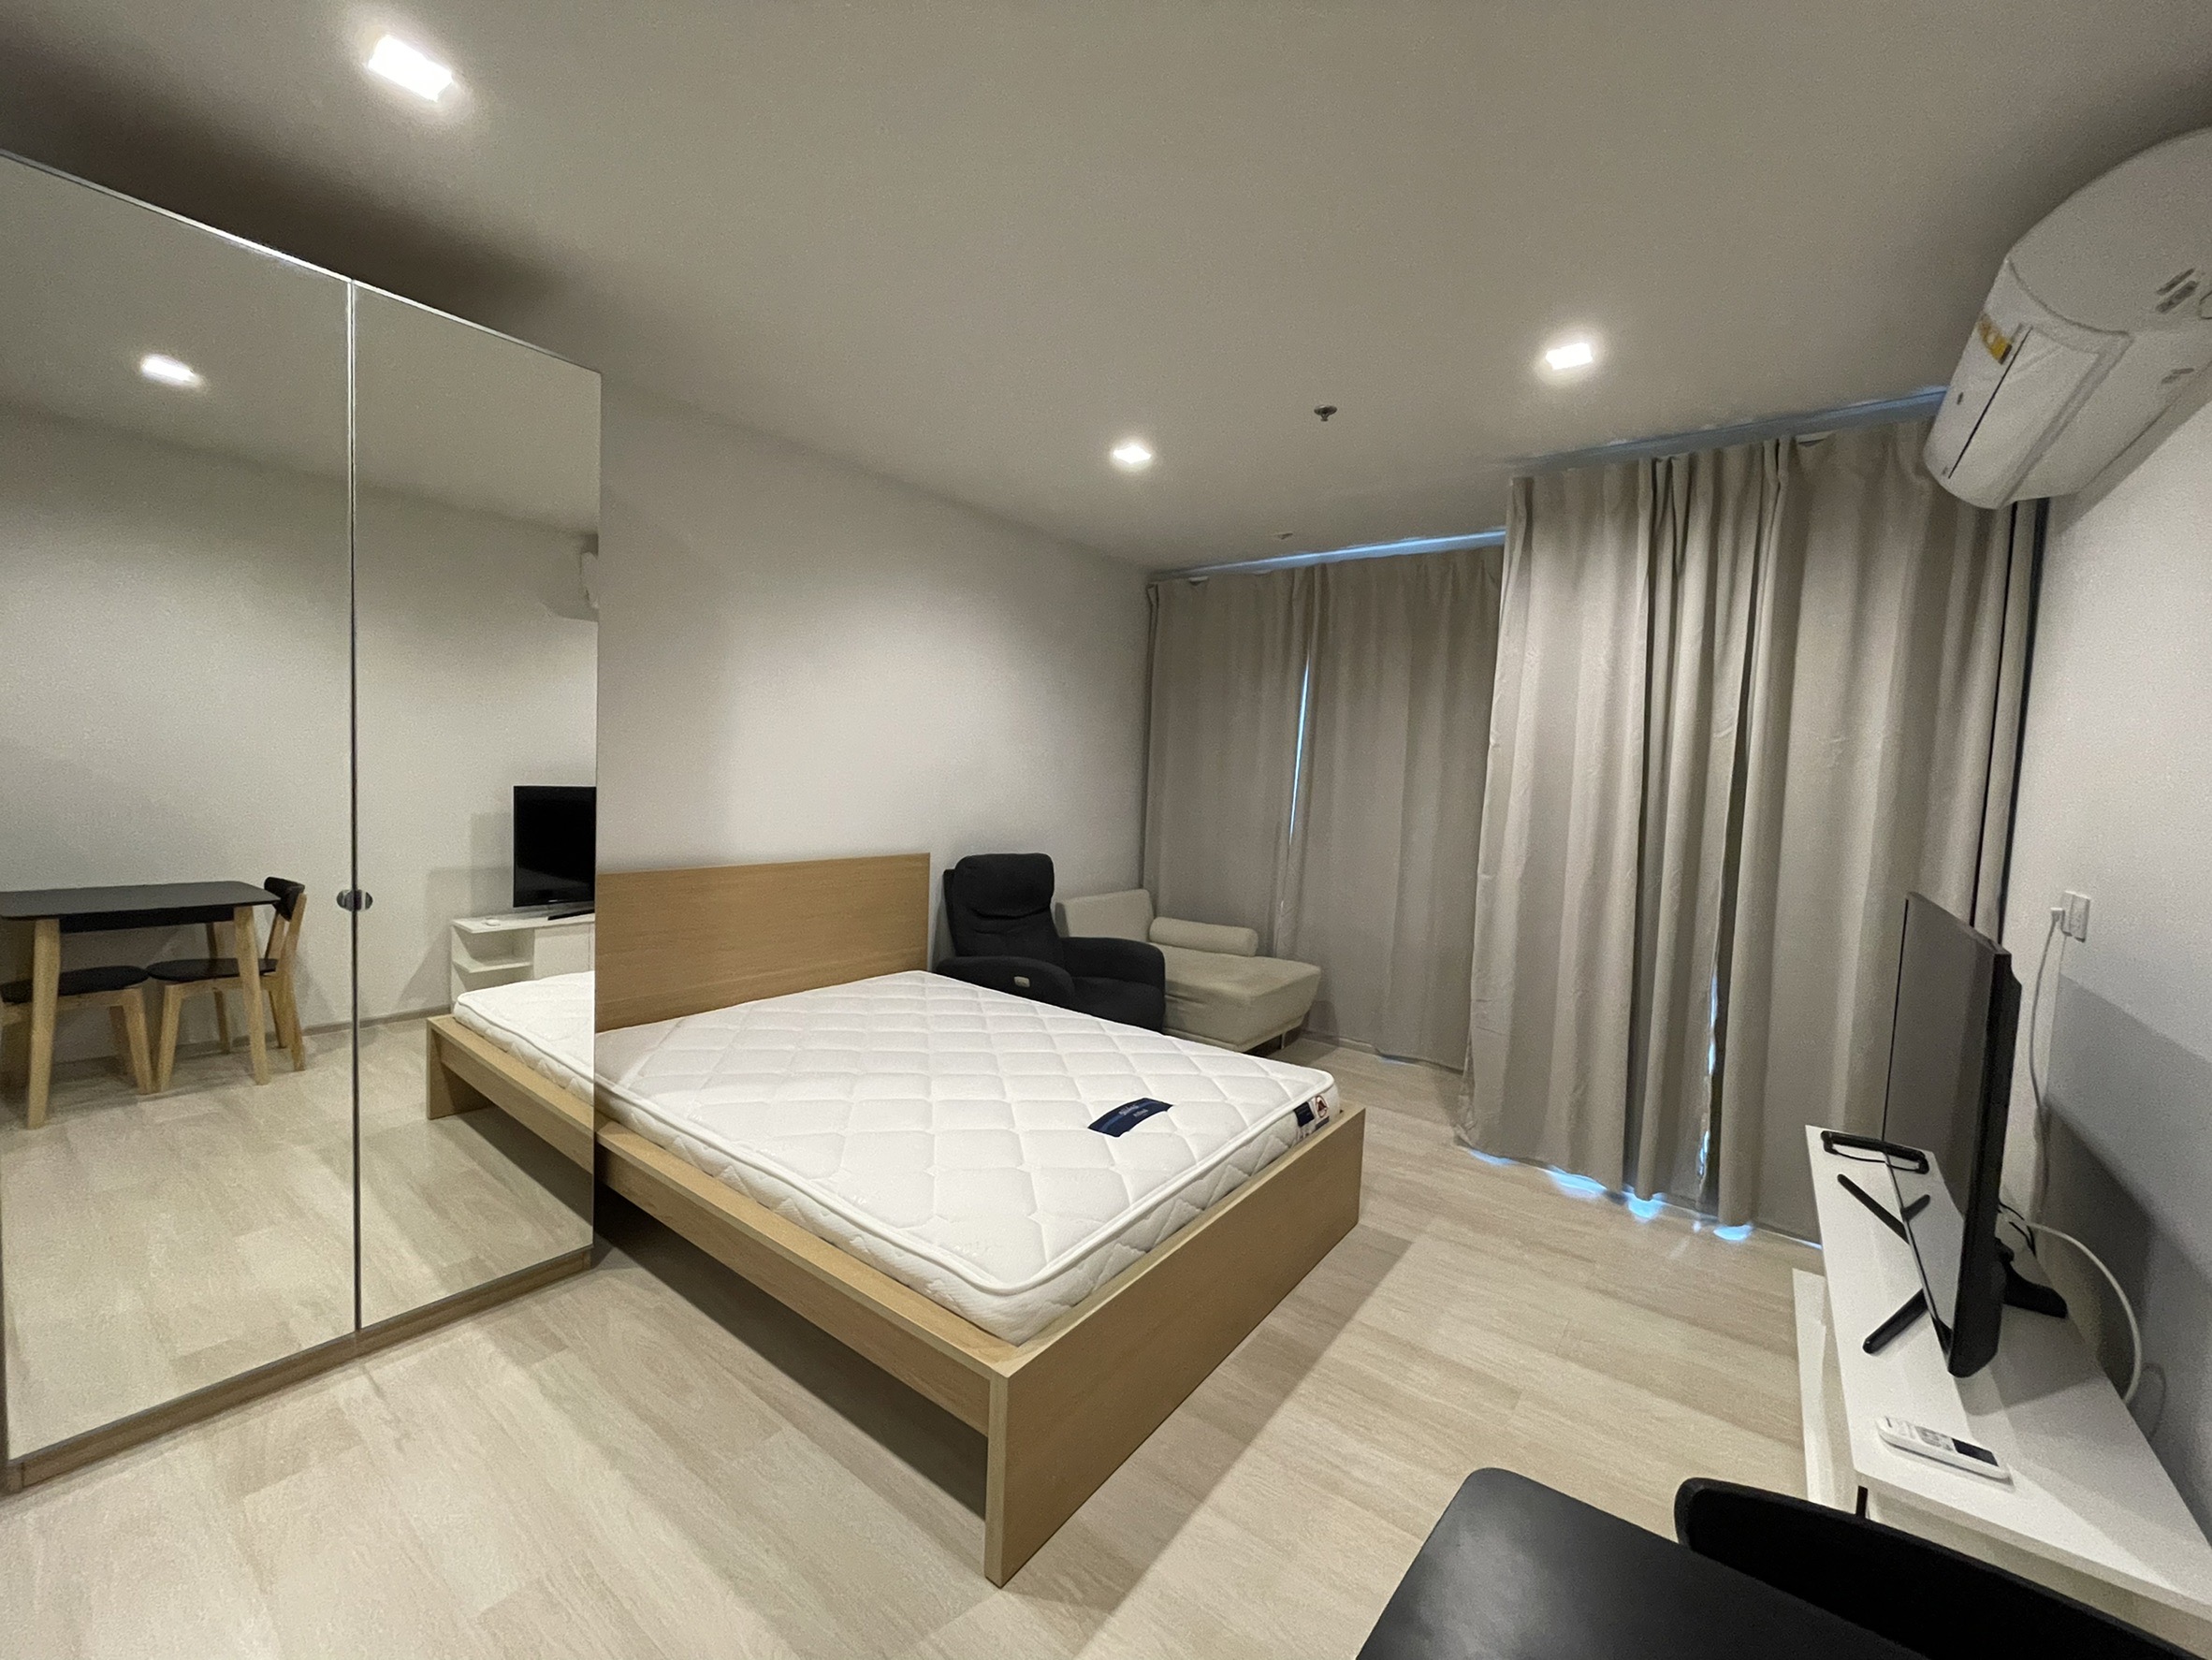 Life One Wireless for Rent – BTS Phloen Chit 600 meters – Unit 28 Sq.m.